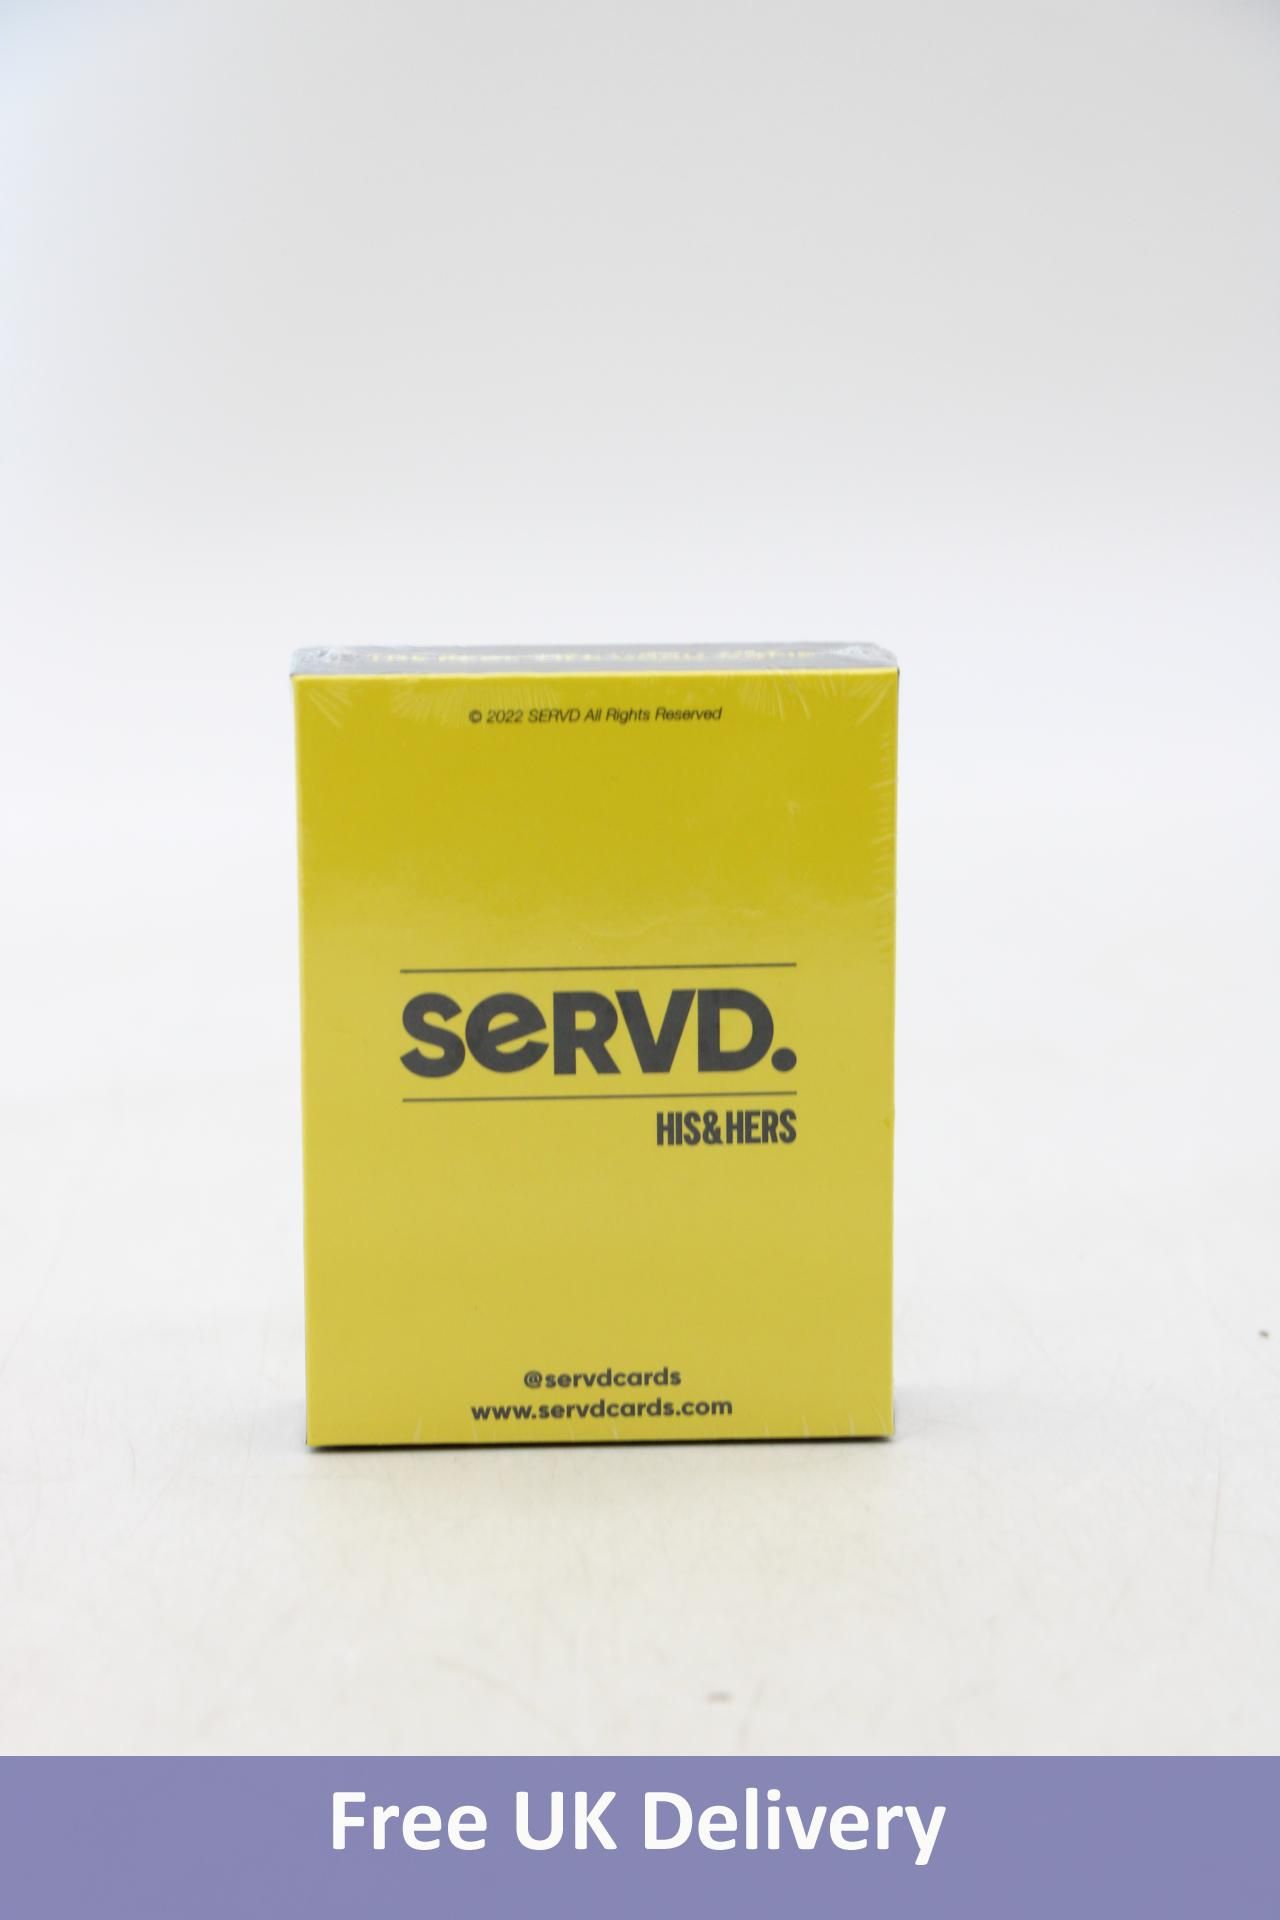 Twenty-four packs of Servd His & Her, The Hilarious Real-Life Couples Card Game